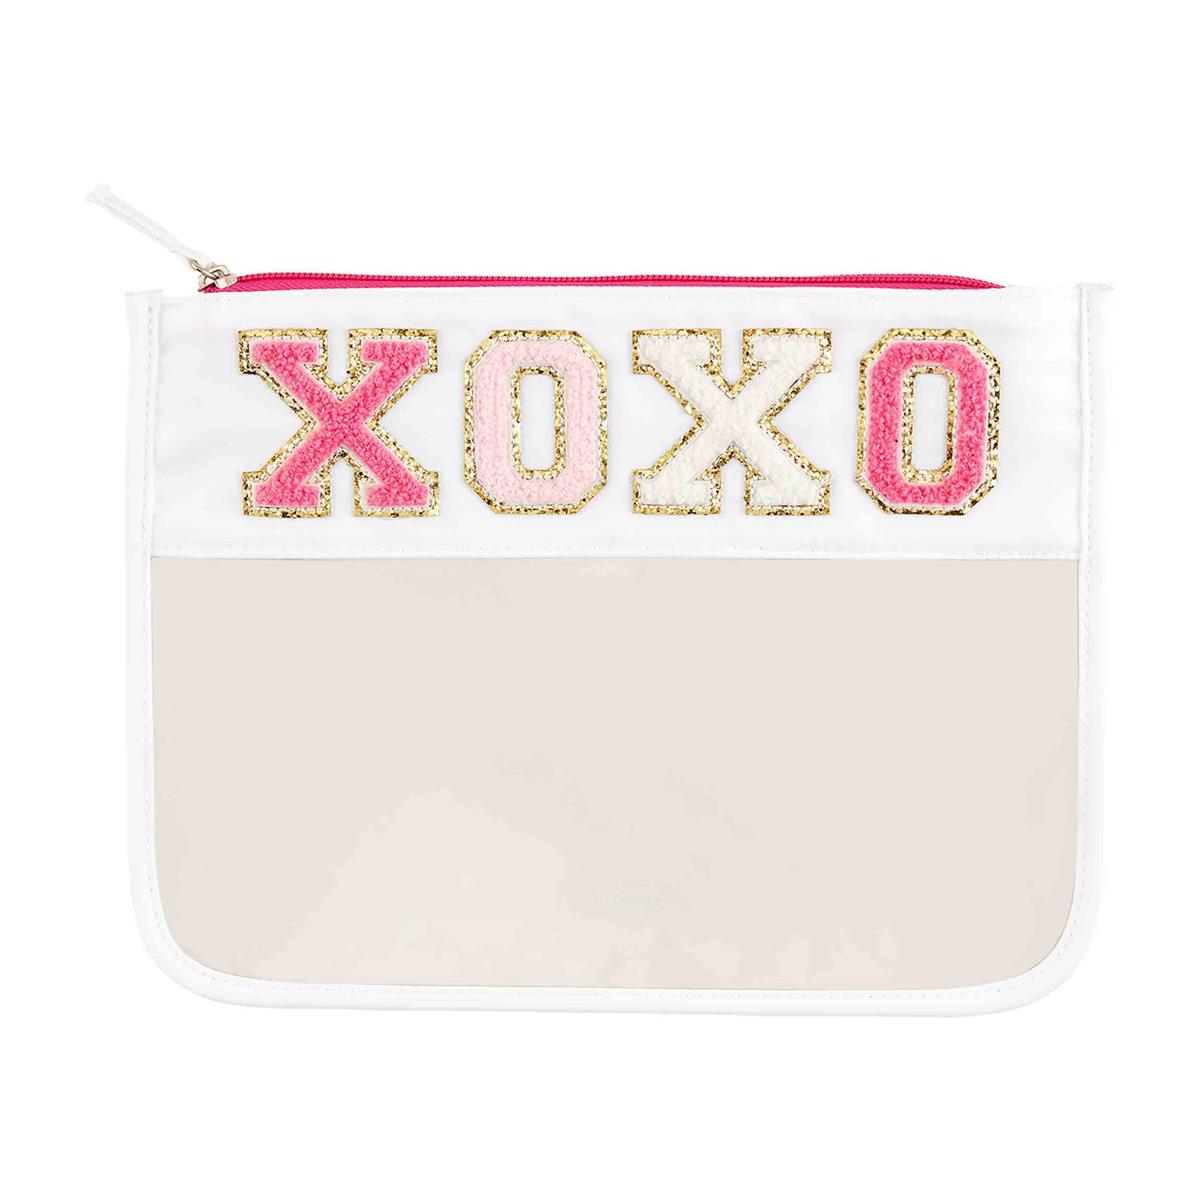 white xoxo and clear patch cases displayed on a white background